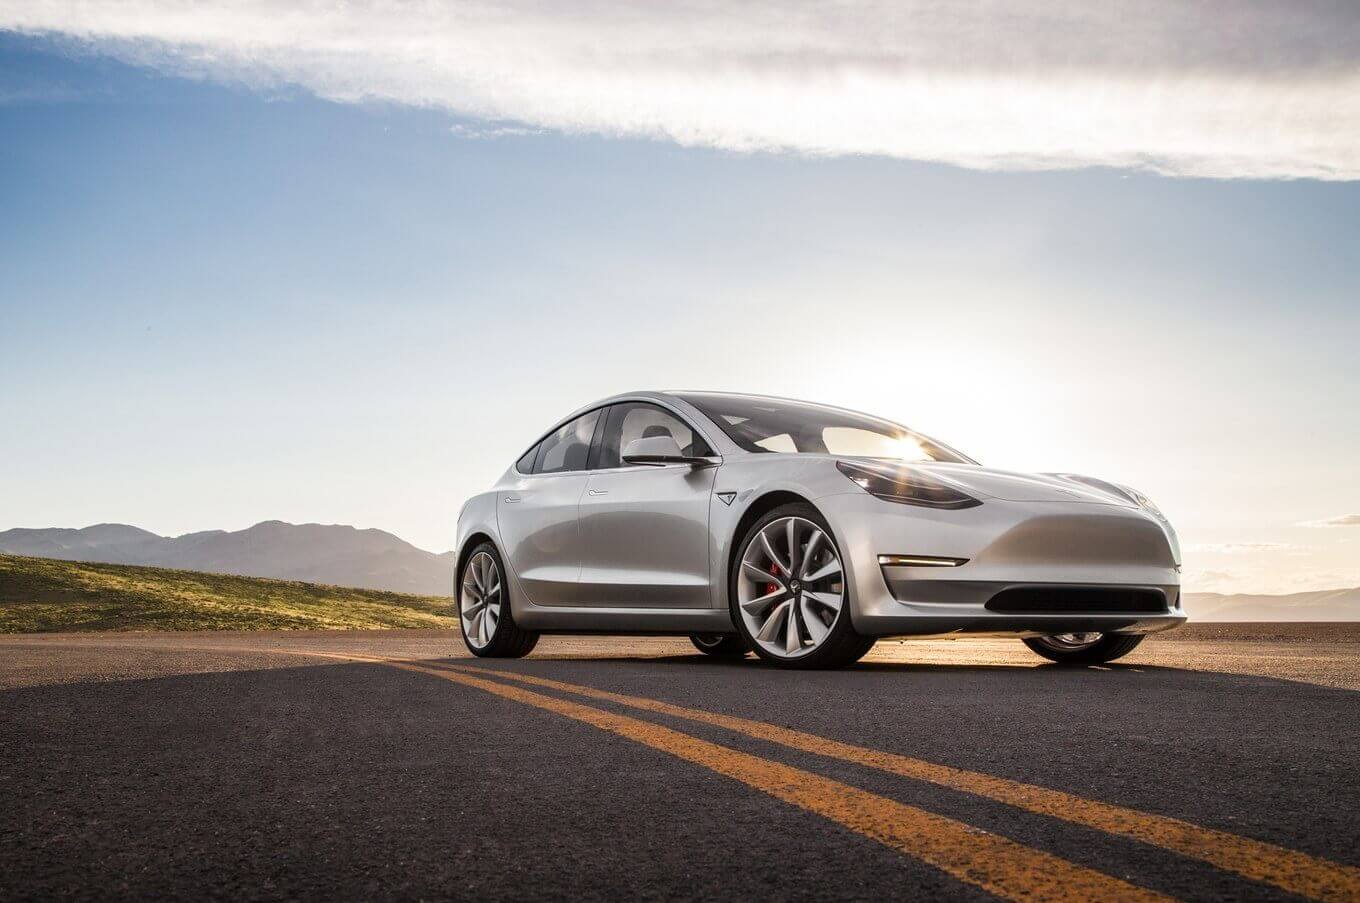 Tesla Model 3 receives the 2019 Top Safety Pick+ award from the IIHS